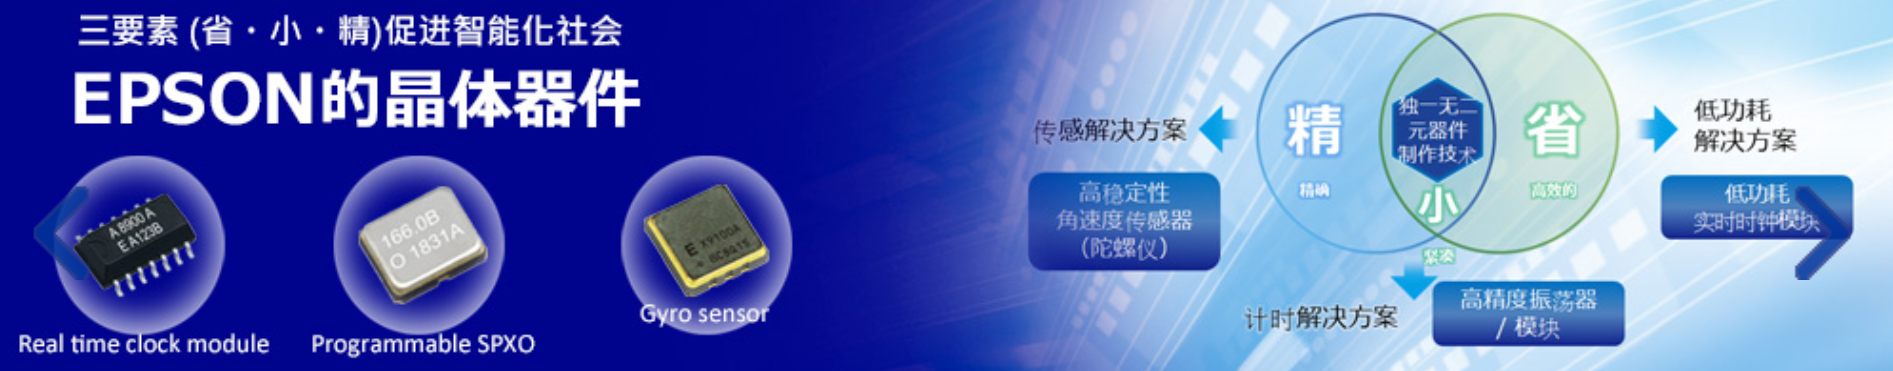 Epson banner (Company Profile Page) CHi SM.png